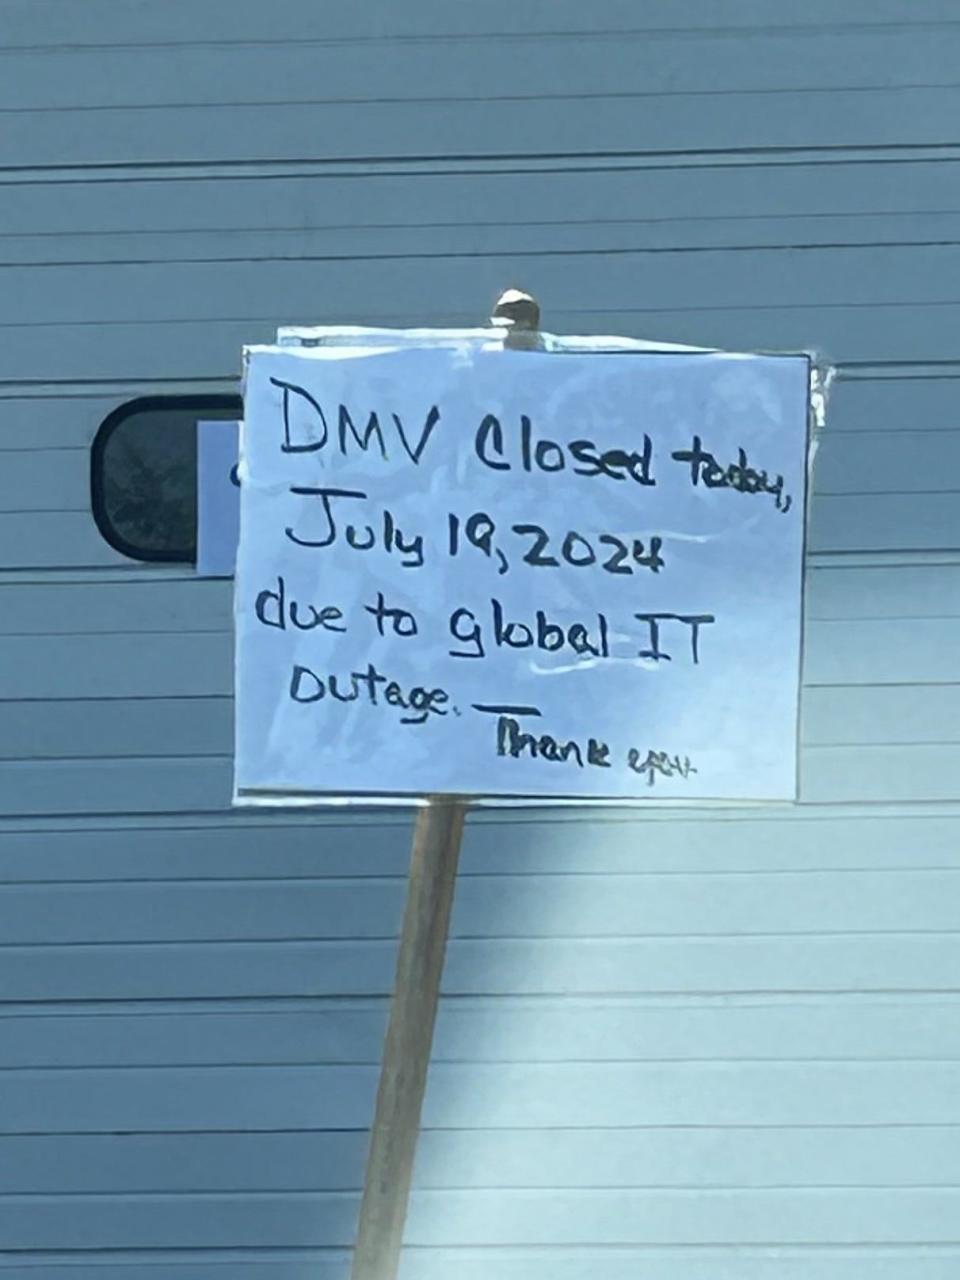 Delaware’s DMV locations are closed on July 19,2024, due to technical issues stemming from a global IT outage. Pictured above is a handwritten closure notice posted outside of the Delaware DMV in New Castle.